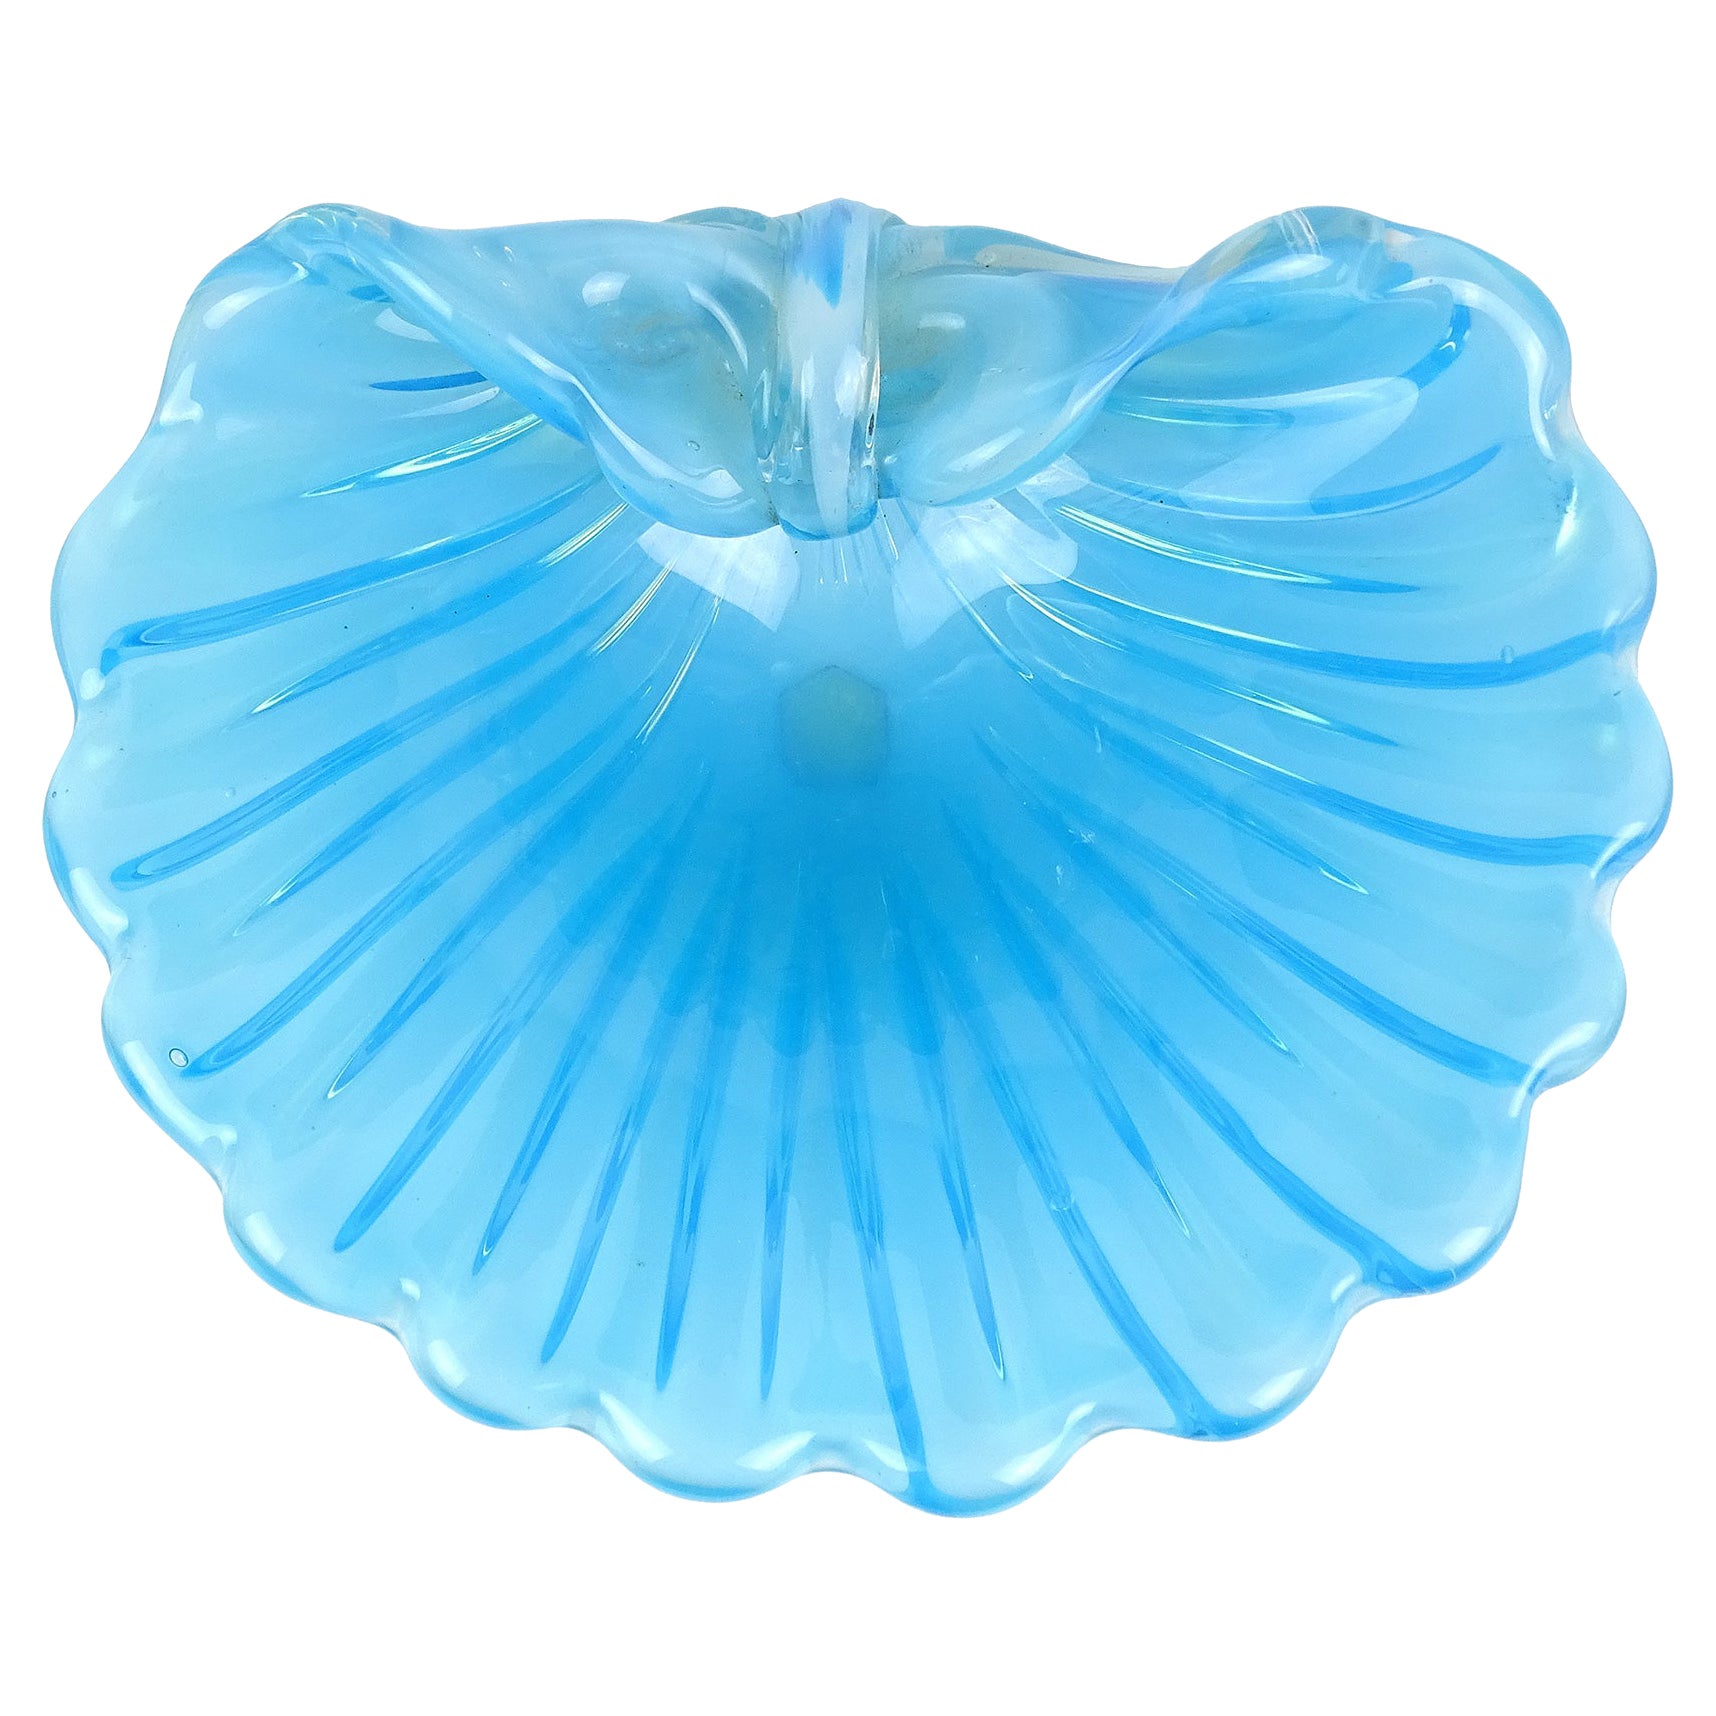 Cenedese Murano Opalescent Blue White Italian Art Glass Fan Conch Seashell Bowl (bol à coquillages)